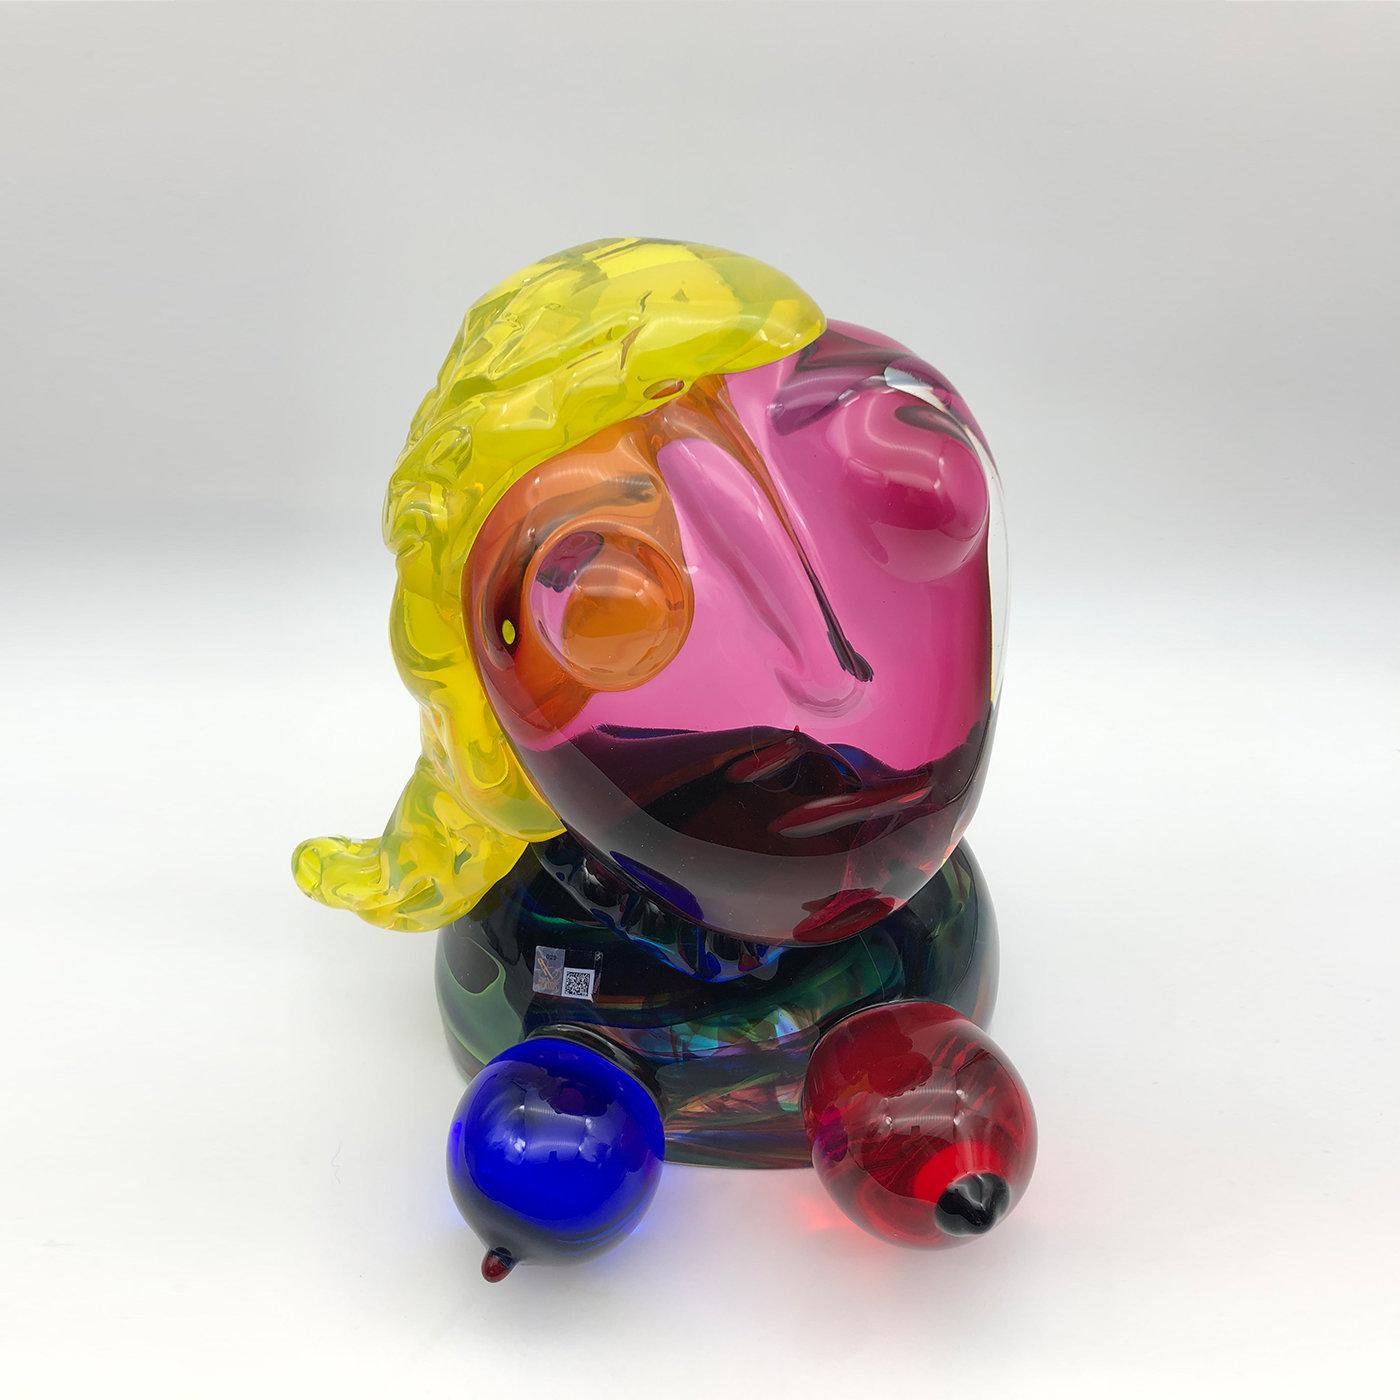 A tribute to visionary Spanish artist Pablo Picasso by master glassmaker Toso Cristiano, this stunning sculpture exudes a colorful charm of Cubist inspiration. Entirely handcrafted of solid glass, it depicts a female figure with blonde hair and a